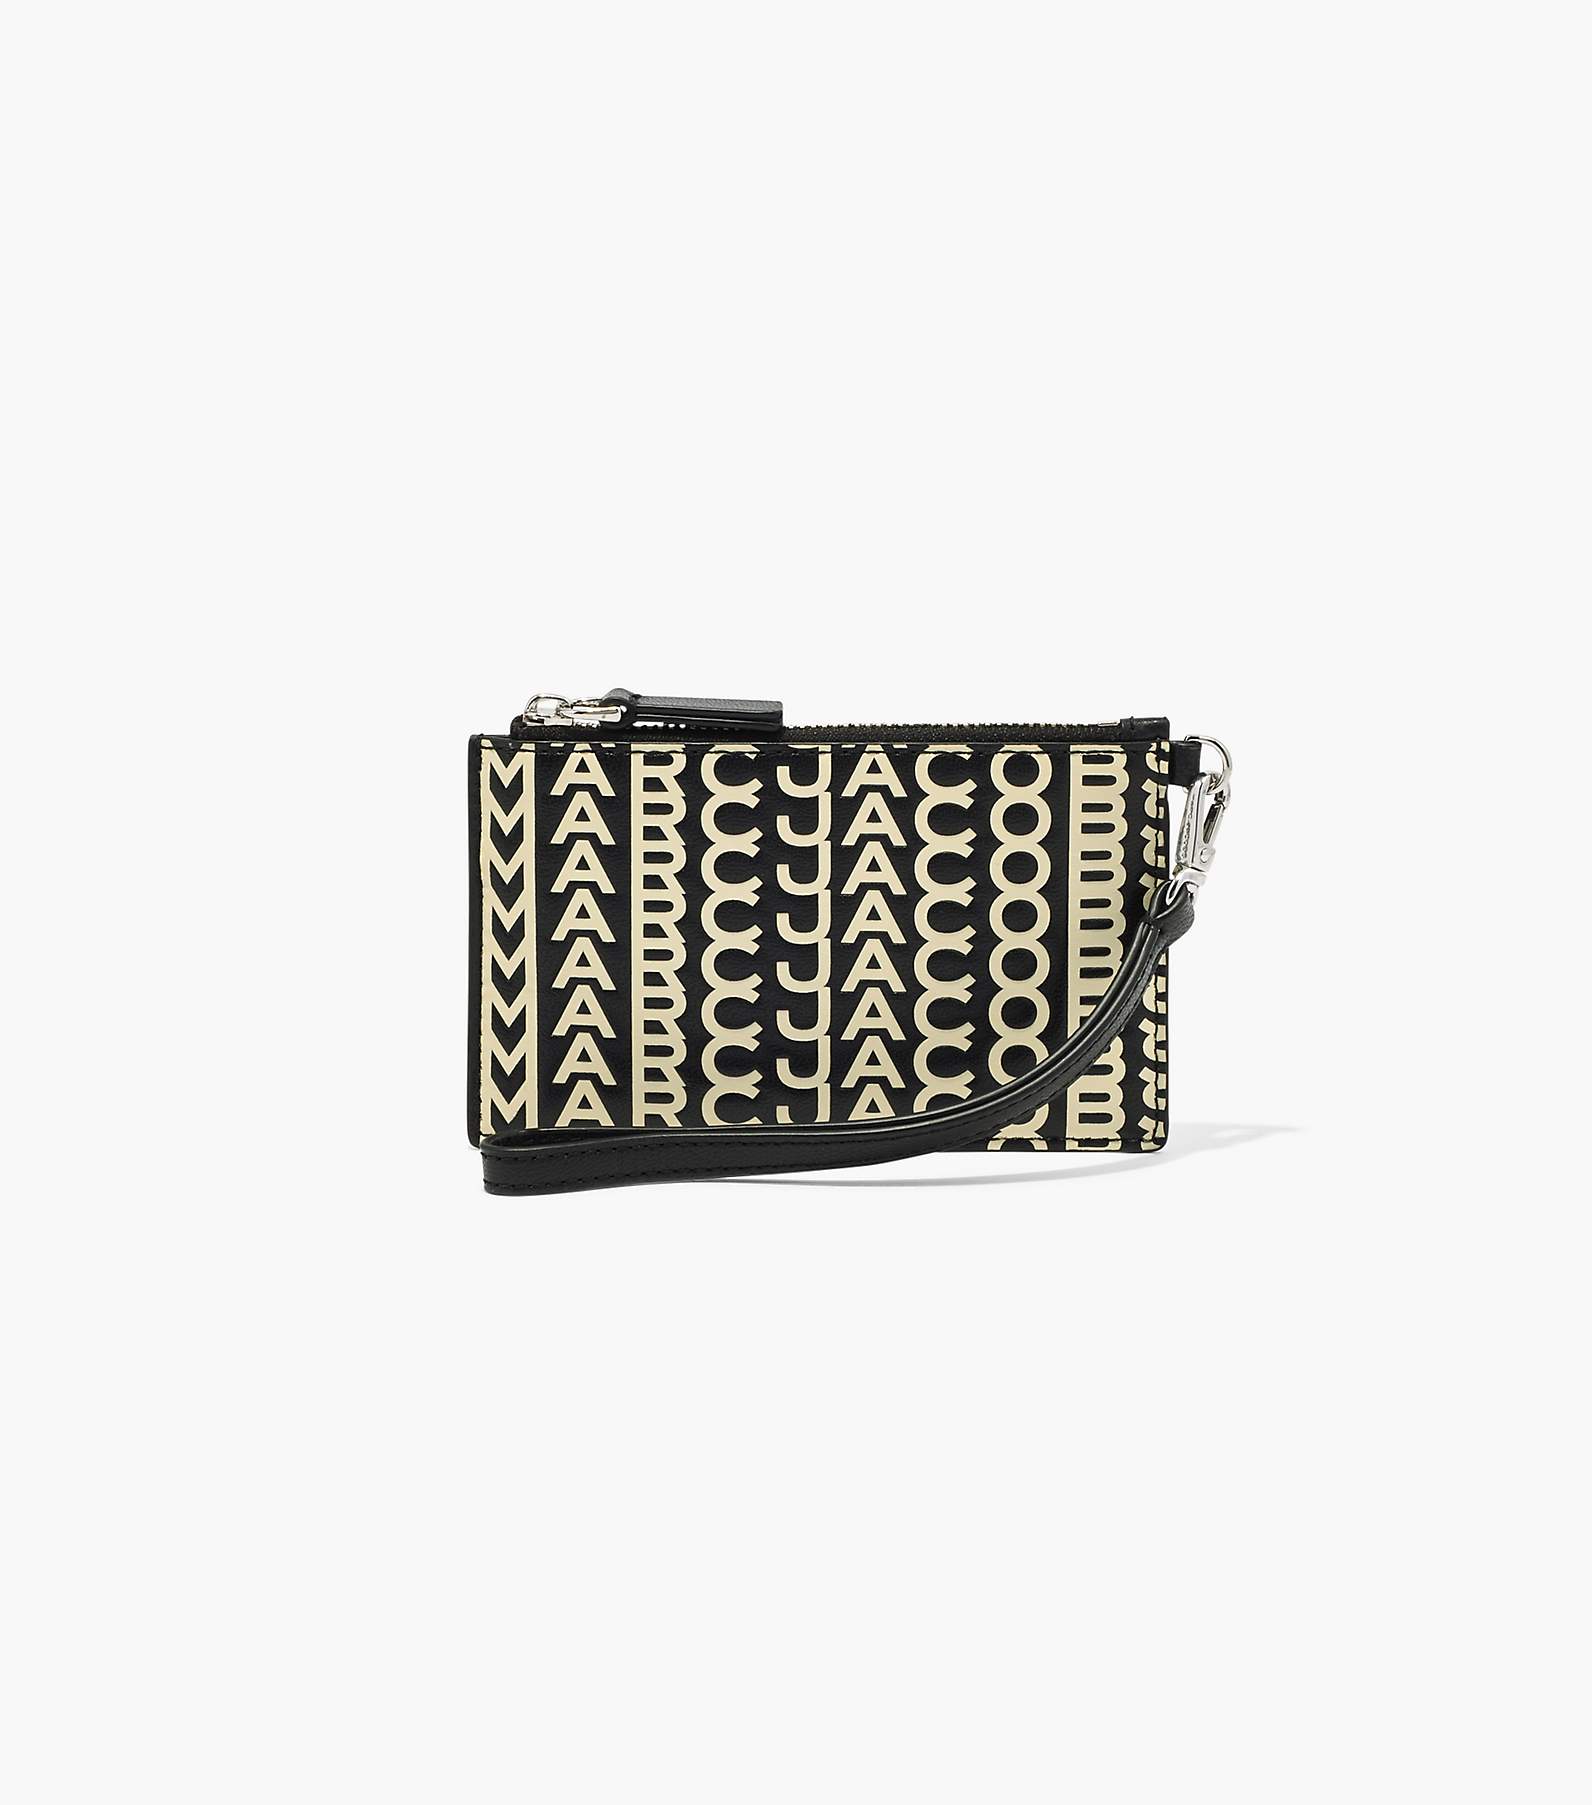 The Snapshot of Marc Jacobs - White leather rectangular bag with